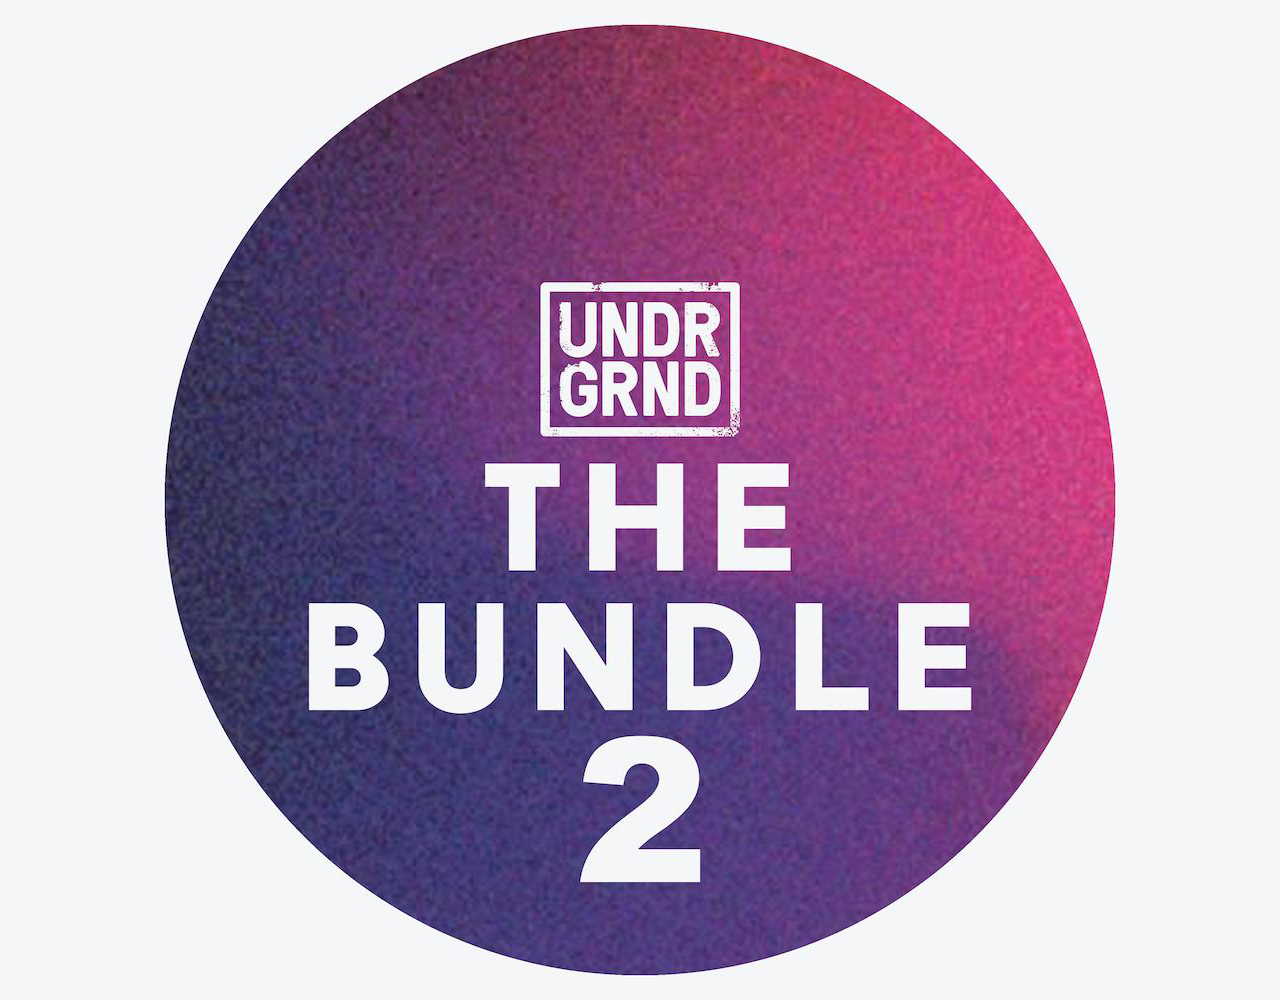 UNDRGRND Sounds ‘The Bundle 2’ contains 60 electronic sample packs for 95% off the individual pack prices